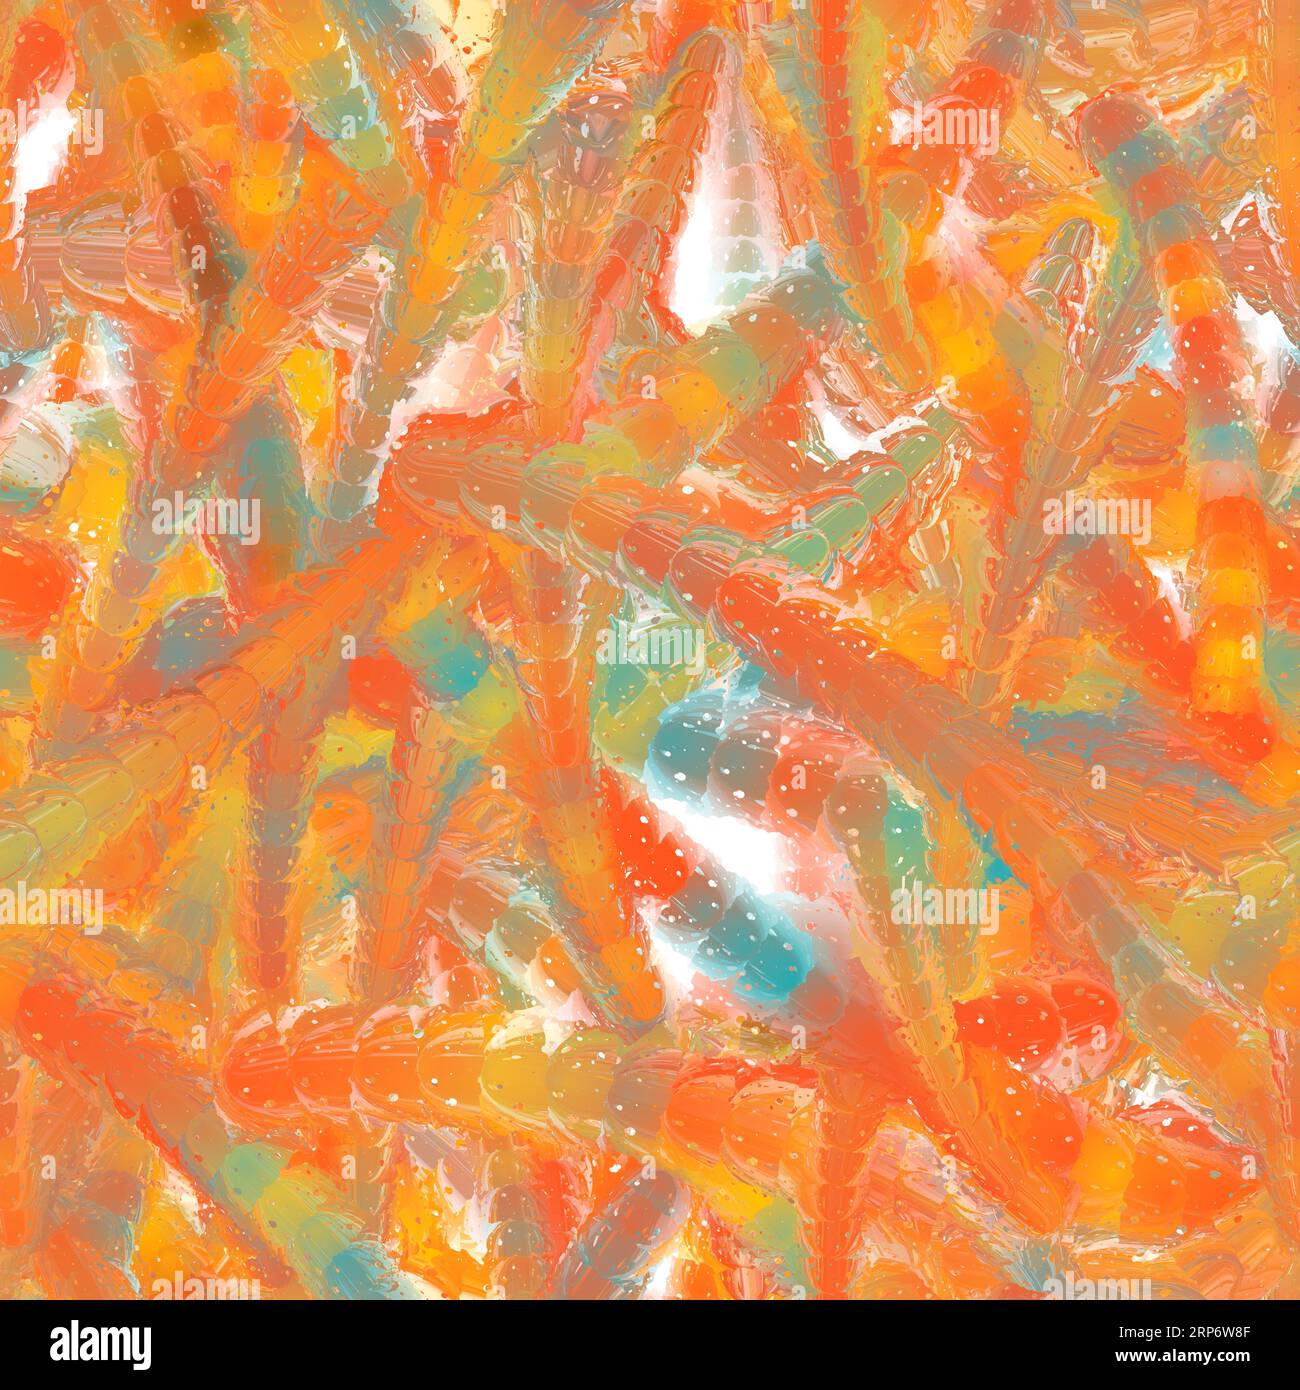 Bright long orange and blue colored liquid brush strokes with reflection. Multicellular organism imitation. Candy imitation. Seamless pattern Stock Photo